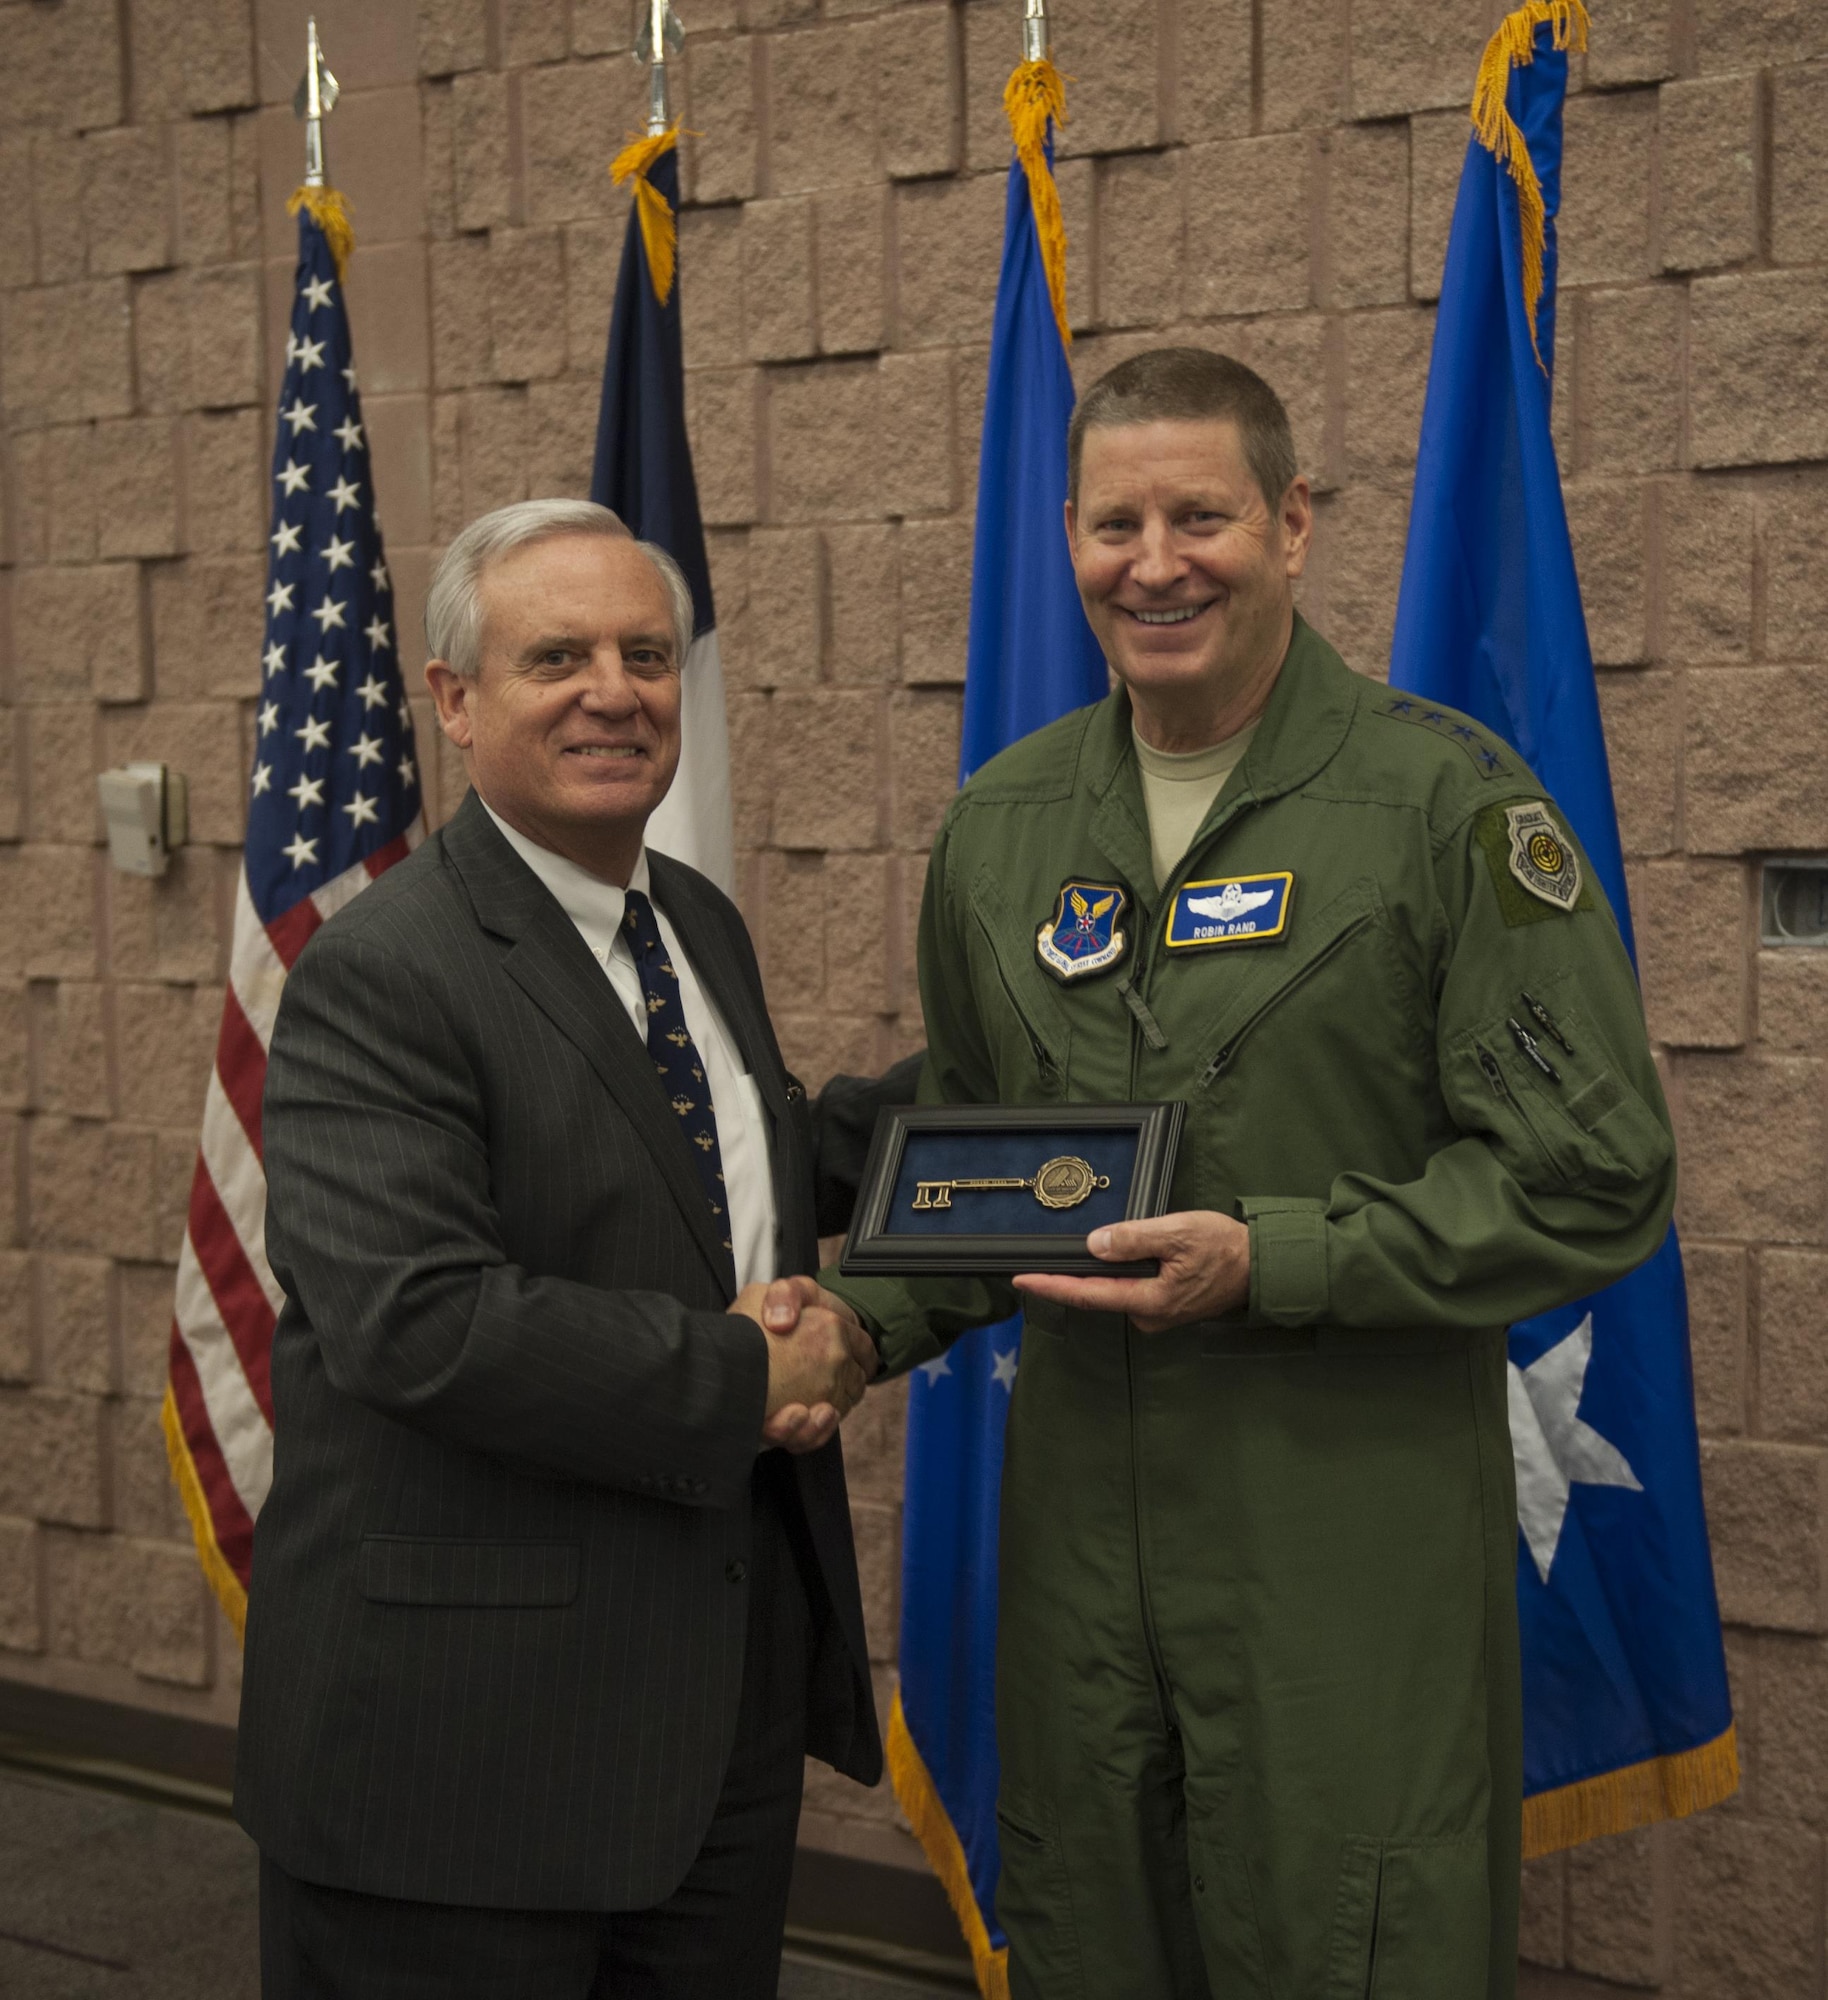 Mayor of Abilene Norm Archibald presents the key to the city to Gen. Robin Rand, AFGSC commander, March 8, 2016, during a Military Affairs Committee luncheon in Abilene, Texas. The presentation of the key honored the strong partnership between the city and Dyess Air Force Base. (U.S. Air Force photo by Airman 1st Class Quay Drawdy/Released)